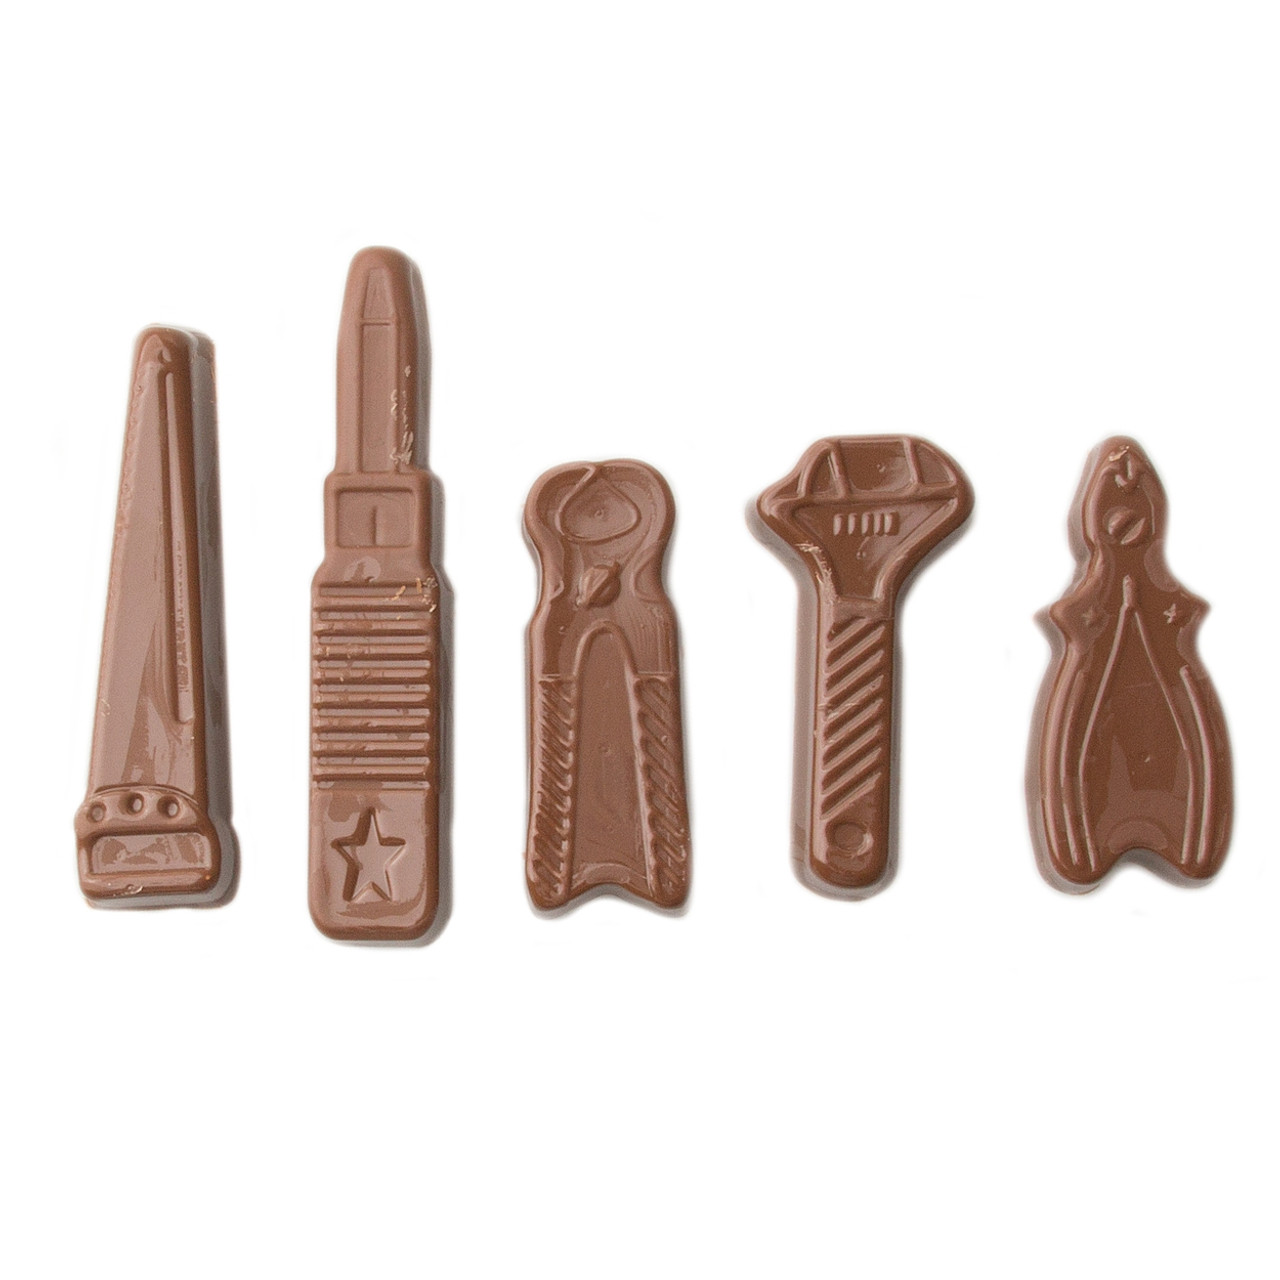 Chocolate In Shape Of Tools Sold In Belgium Close Stock Photo